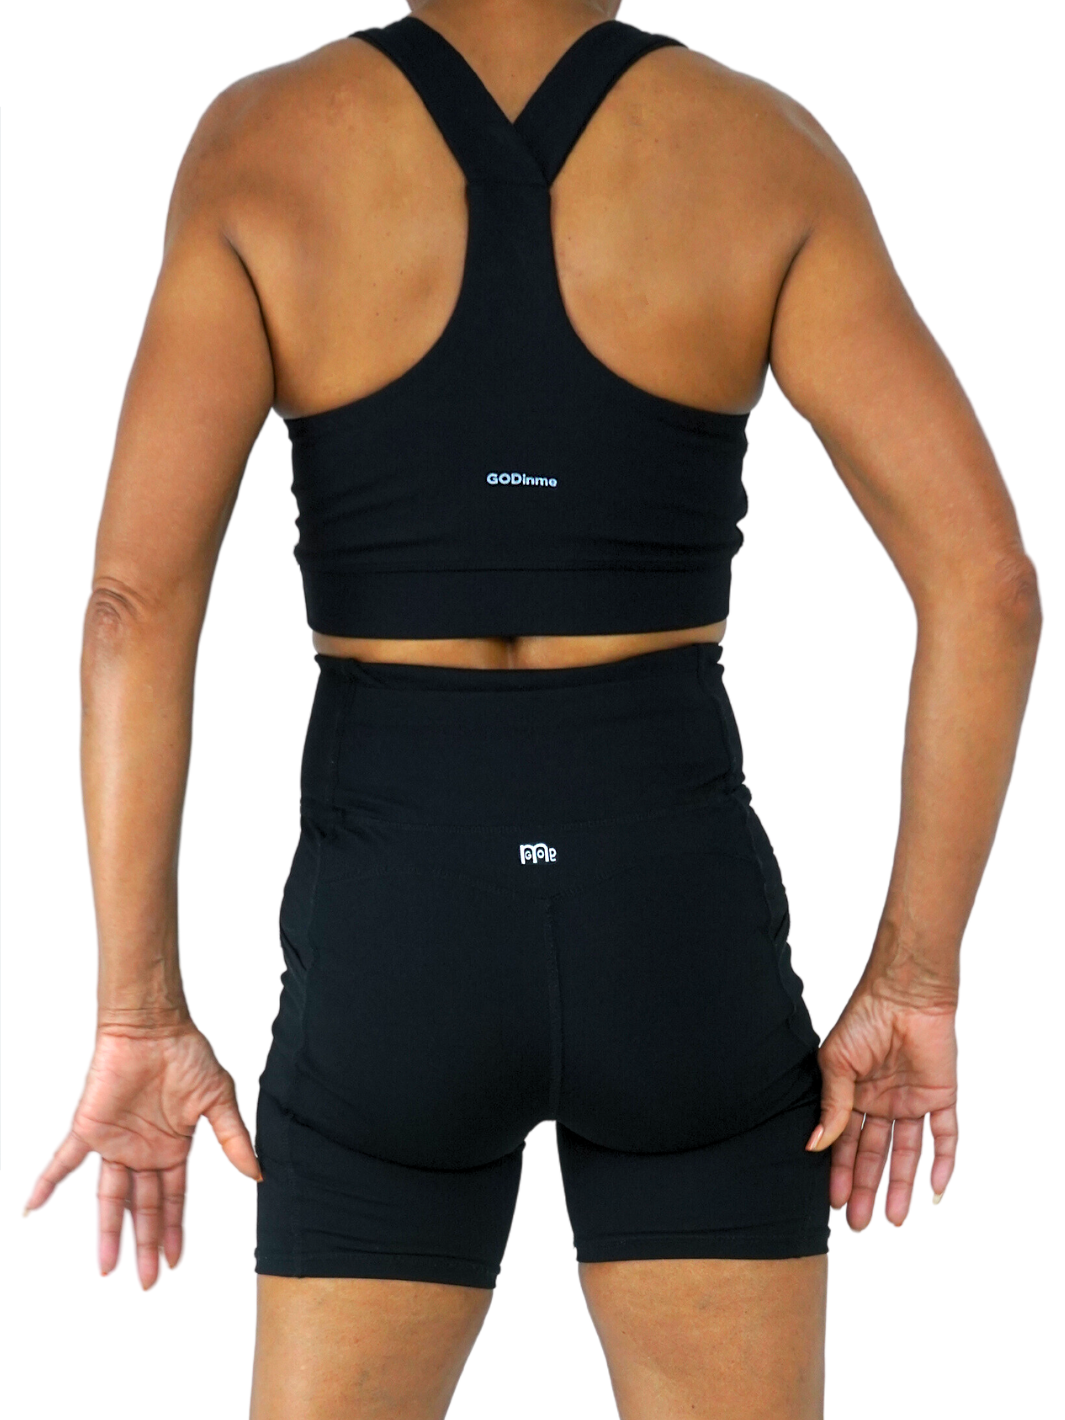 Black sports/workout bra with classic front straps and logo printed on left; Y-Back racer design for maximum support (Godinme printed in center); removable pads, moisture-wicking fabric for added comfort, and four-way stretch allowing for full range of motion.